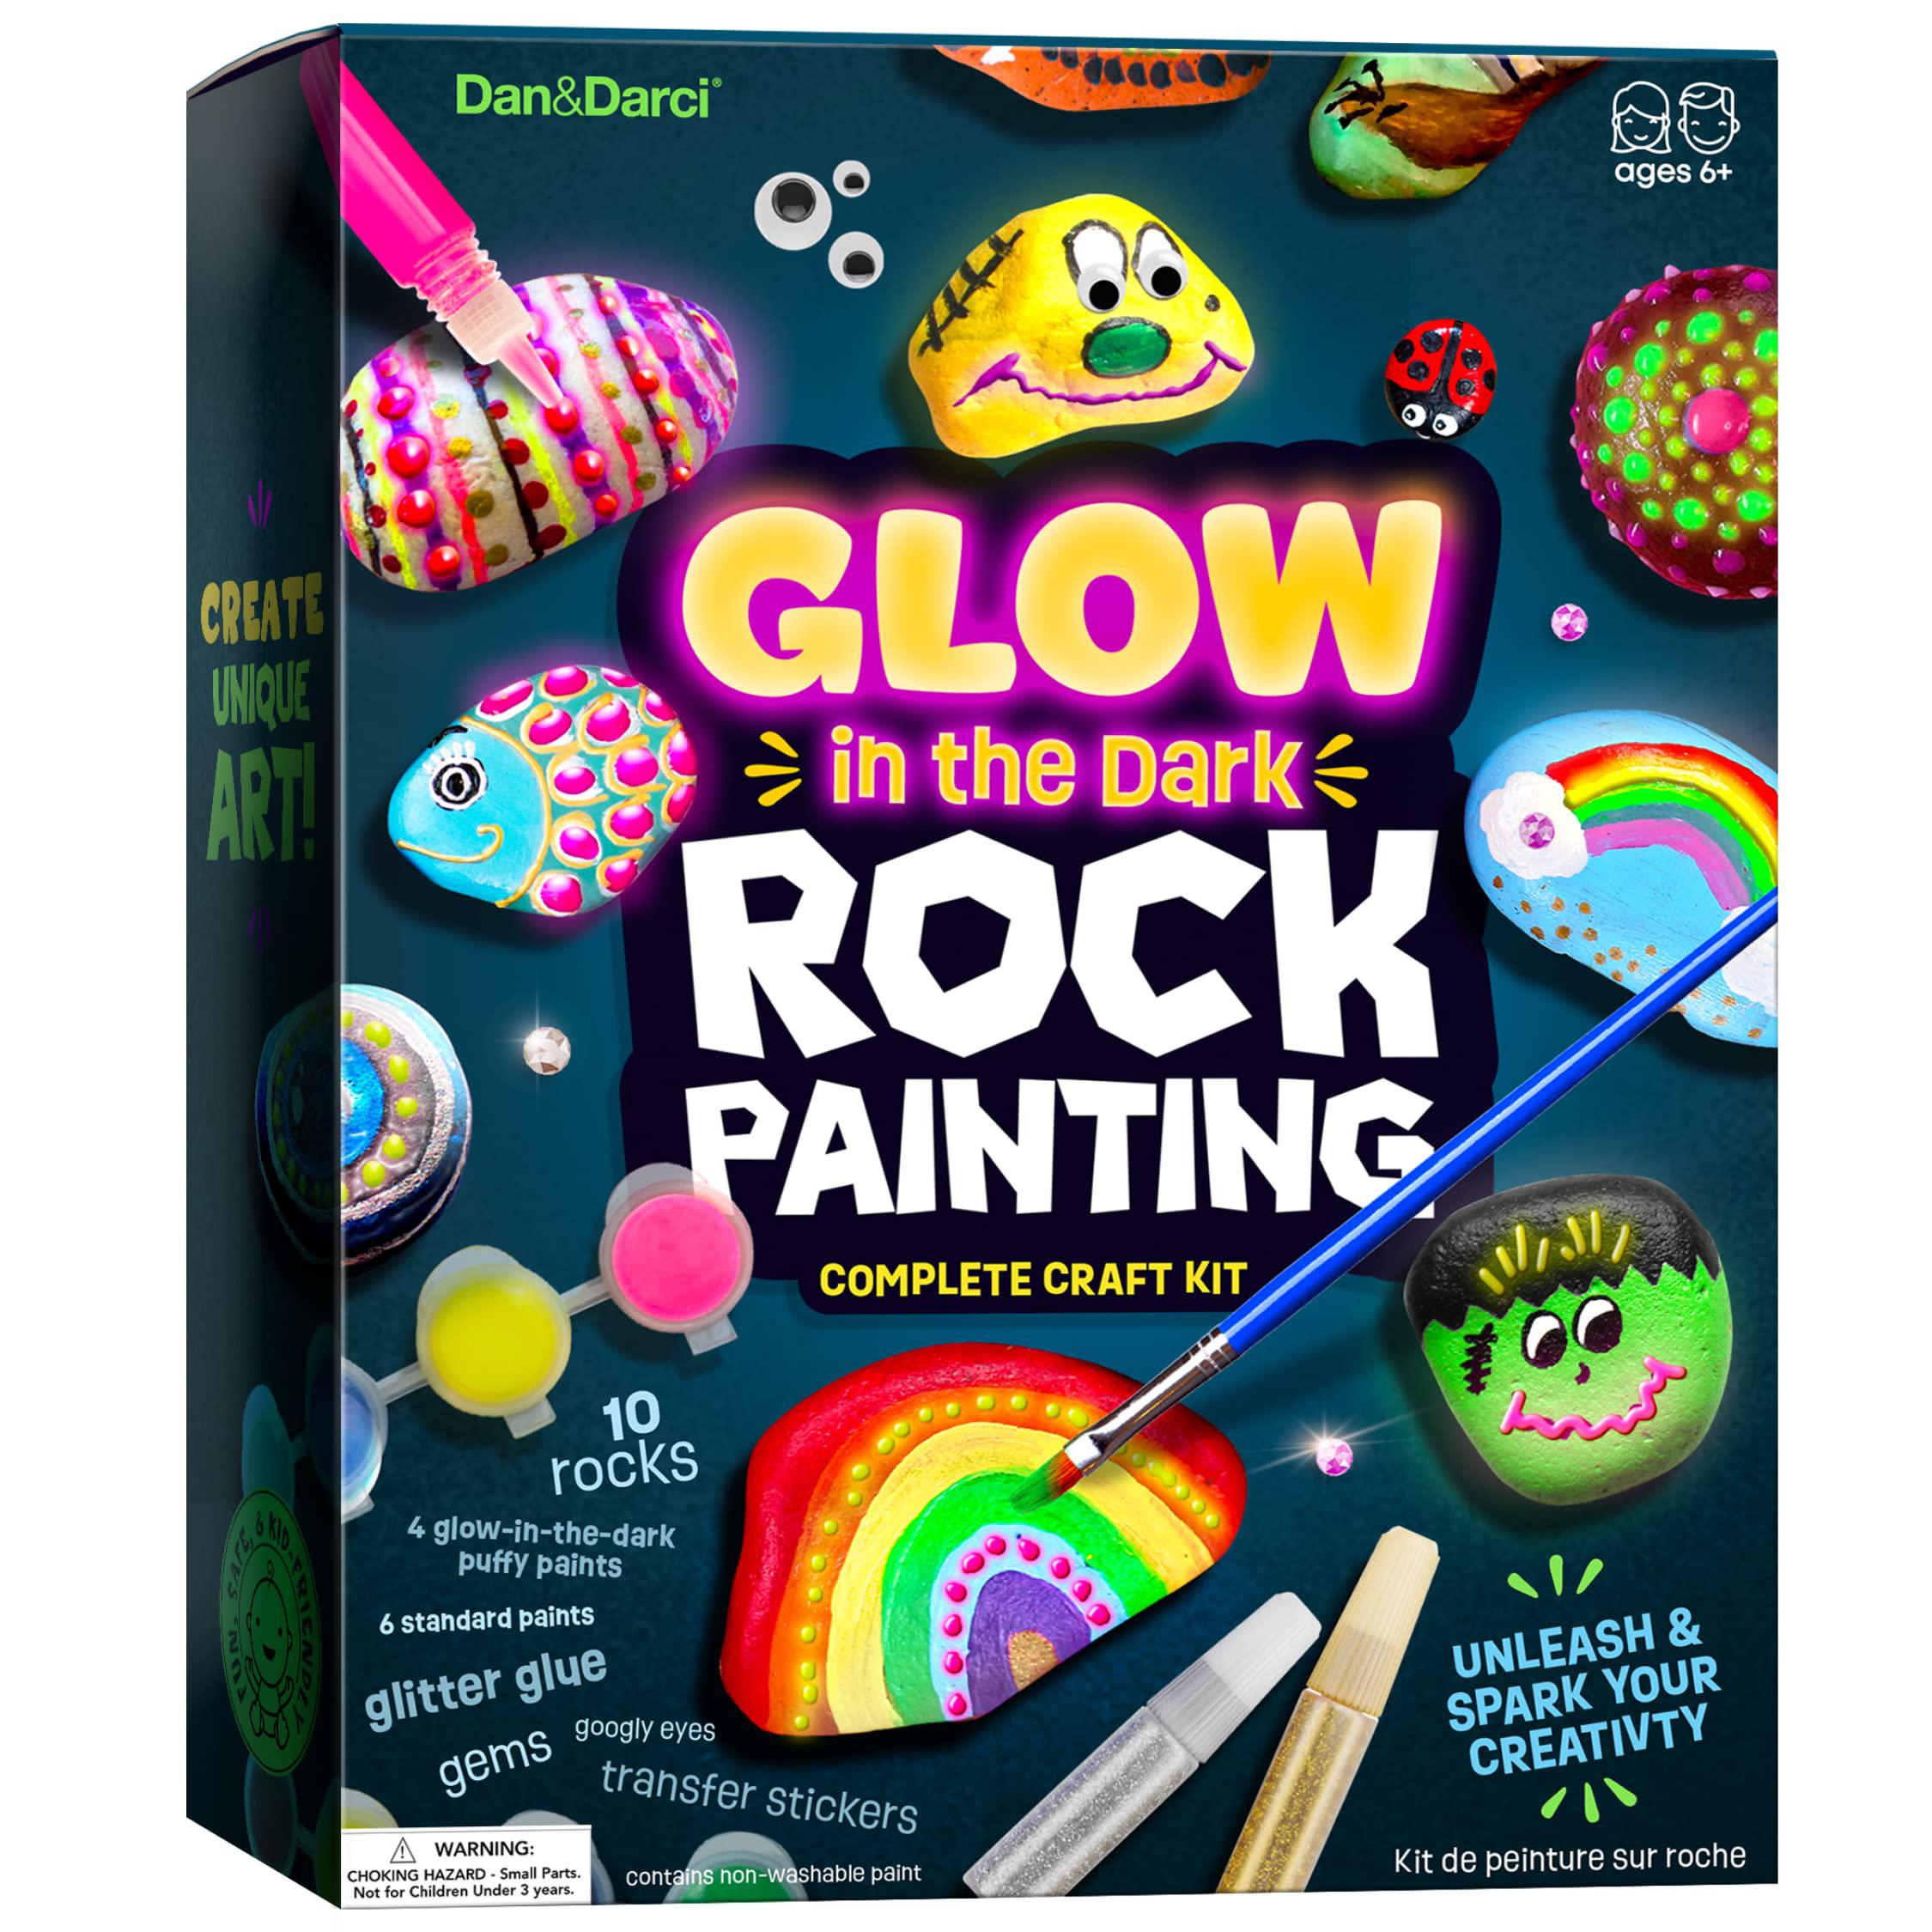 Dan&Darci kids rock painting kit - glow in the dark - arts & crafts gifts  for boys and girls ages 4-12 - craft activities kits - creati